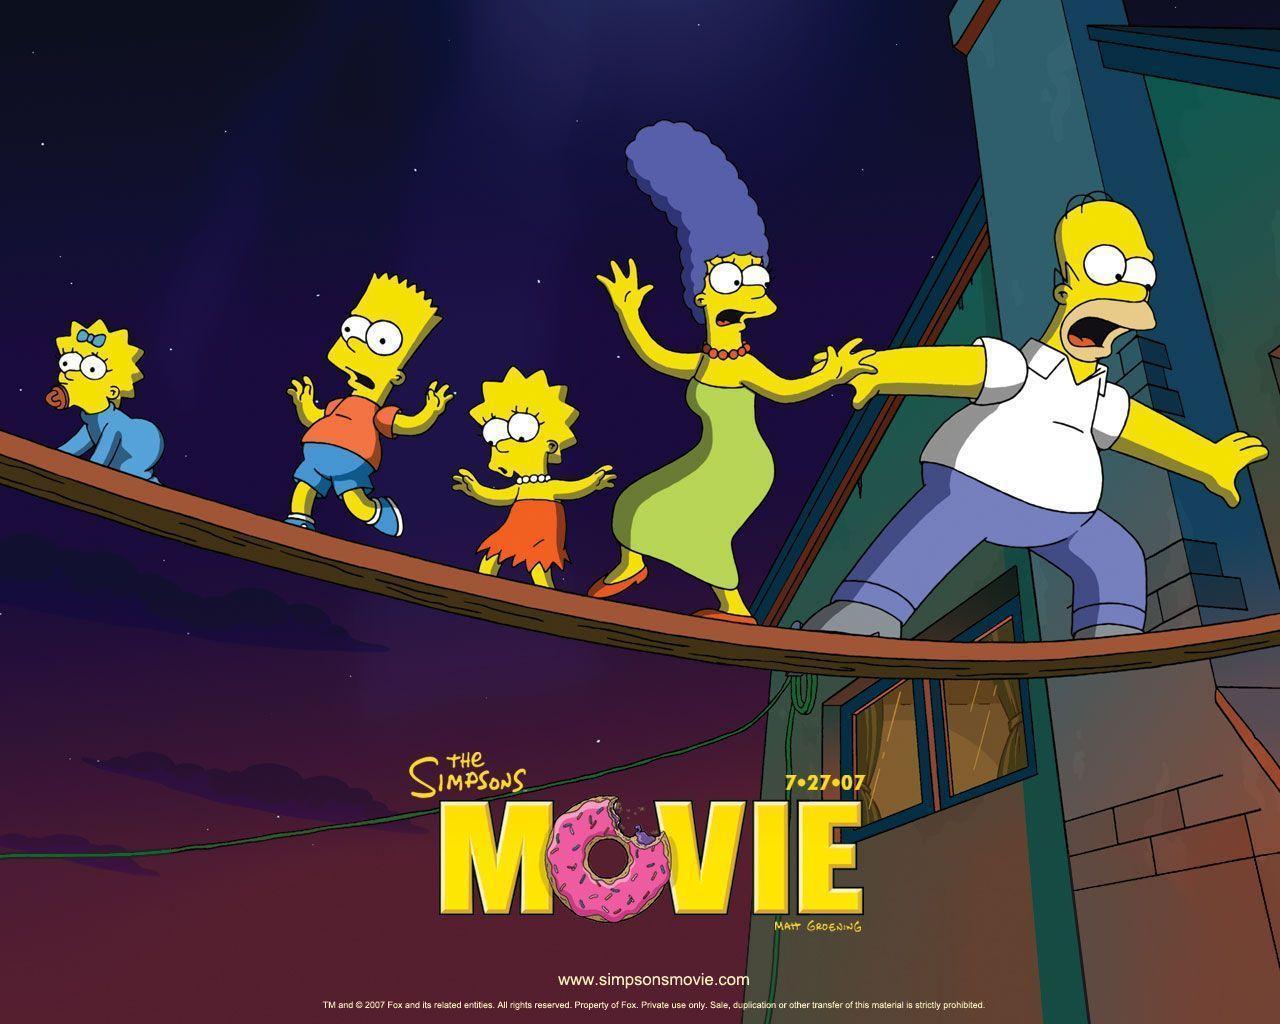 The Simpsons Movie Wallpaper HD 1080p